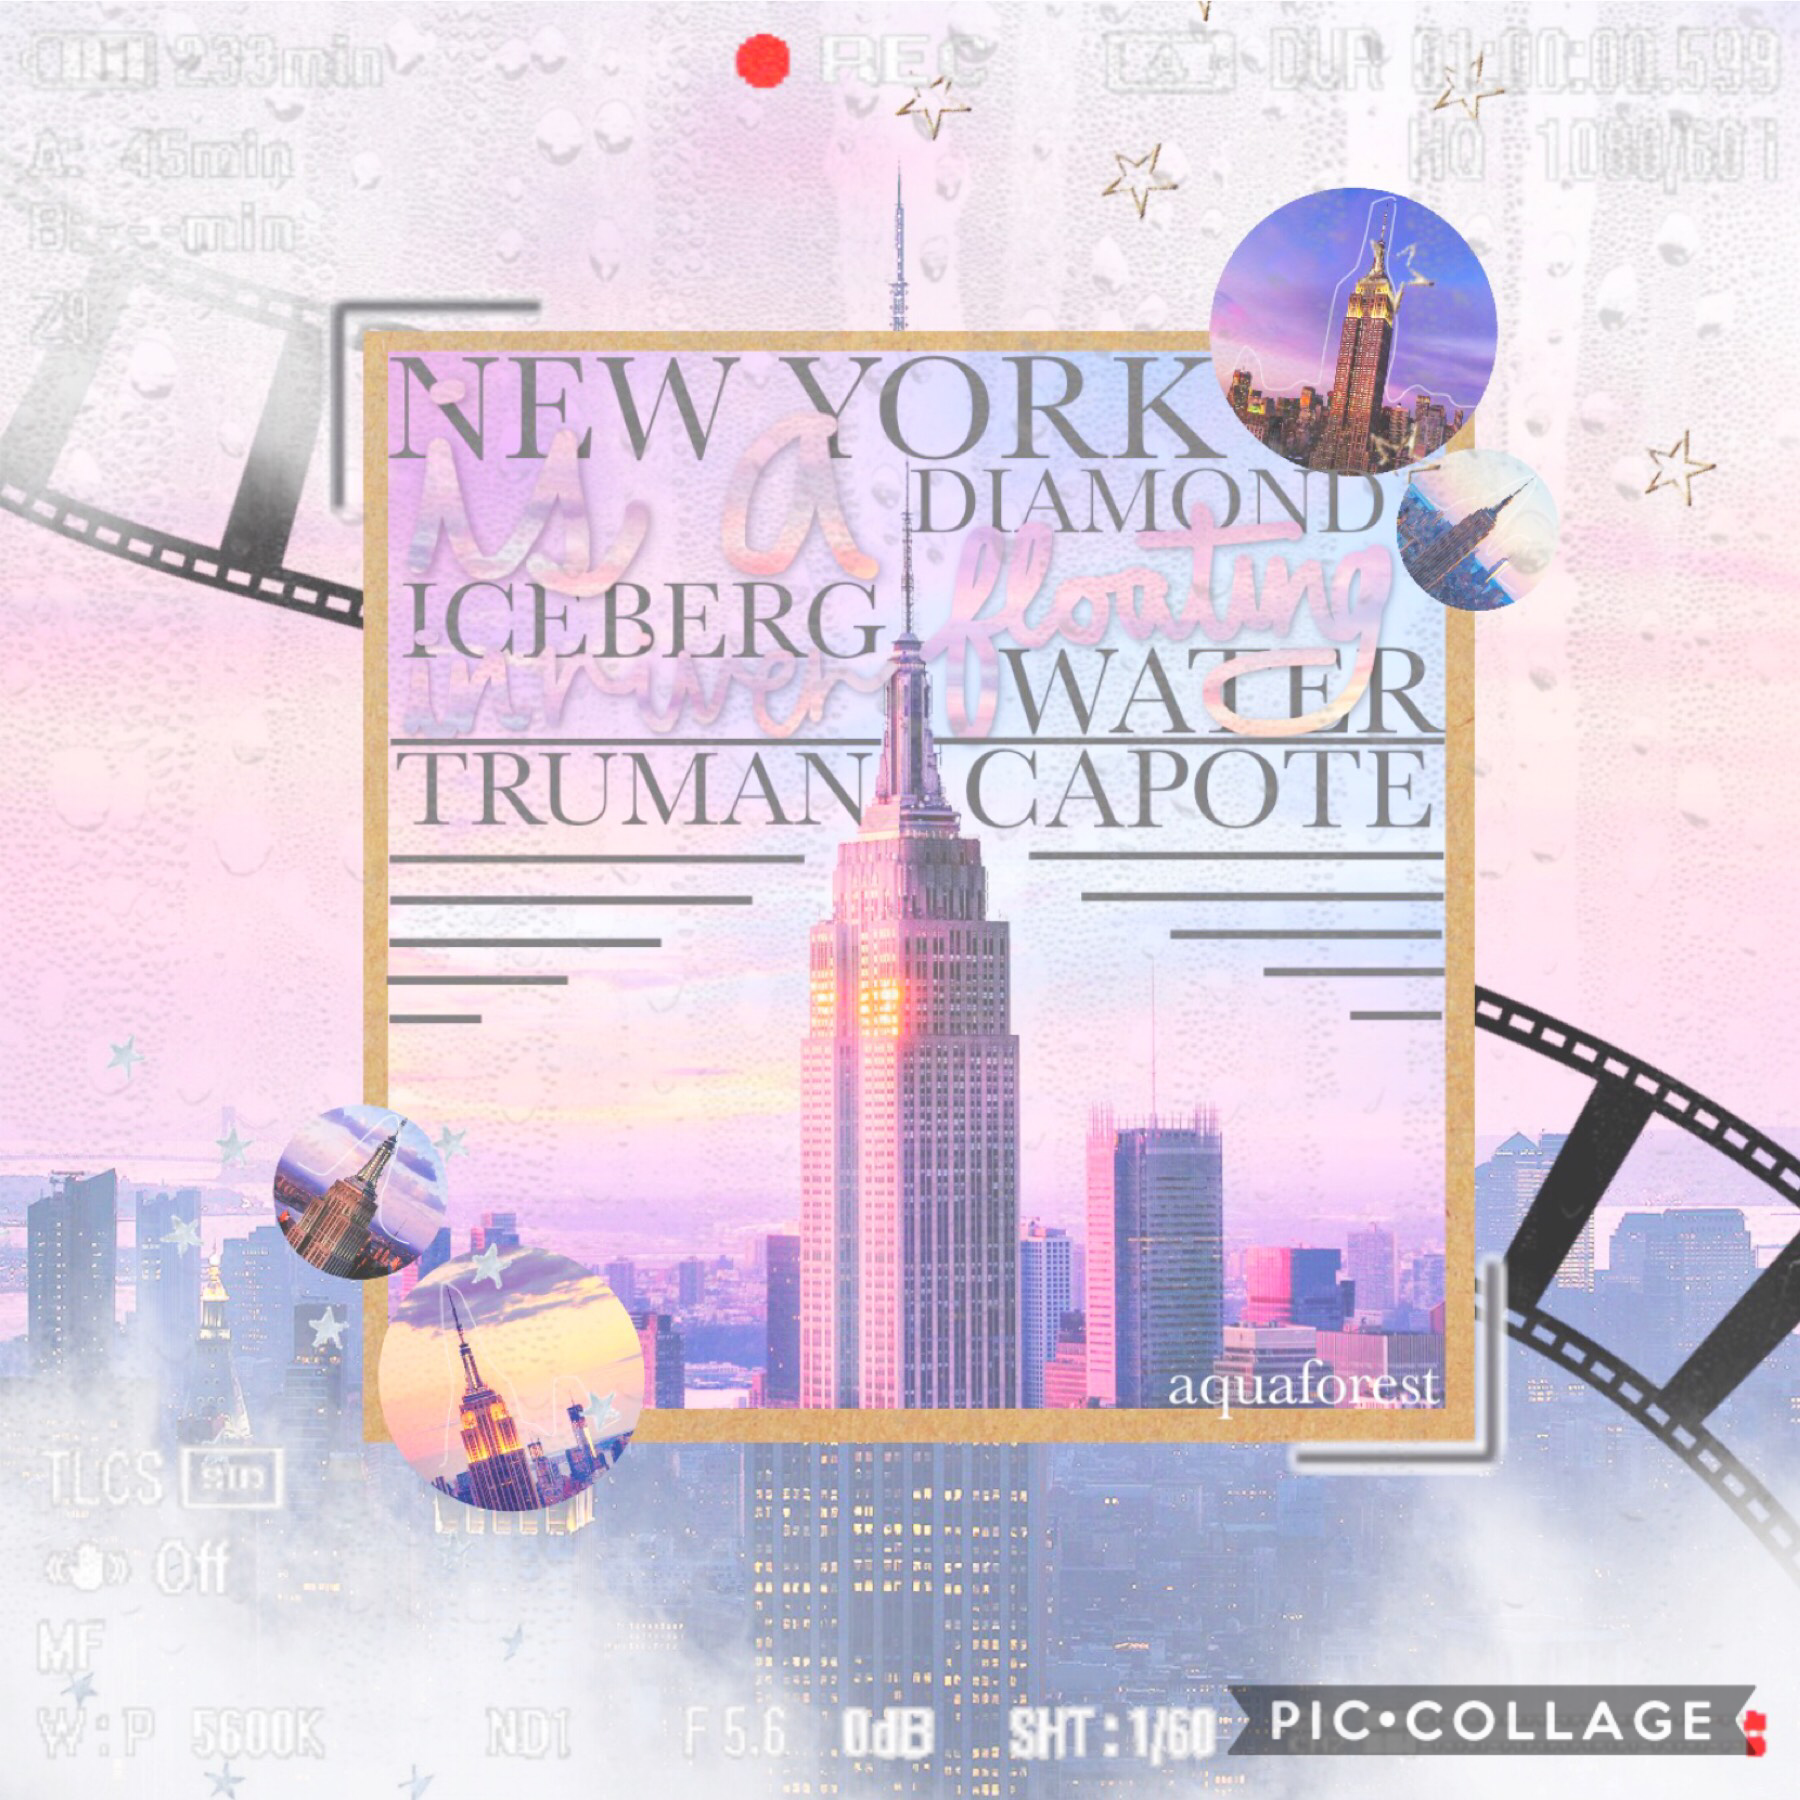 TAP
WHEW I HAVENT BEEN ON DIS ACC IN A LOOONG TIME
this is my entry for -lau’s games! Theme:nyc
